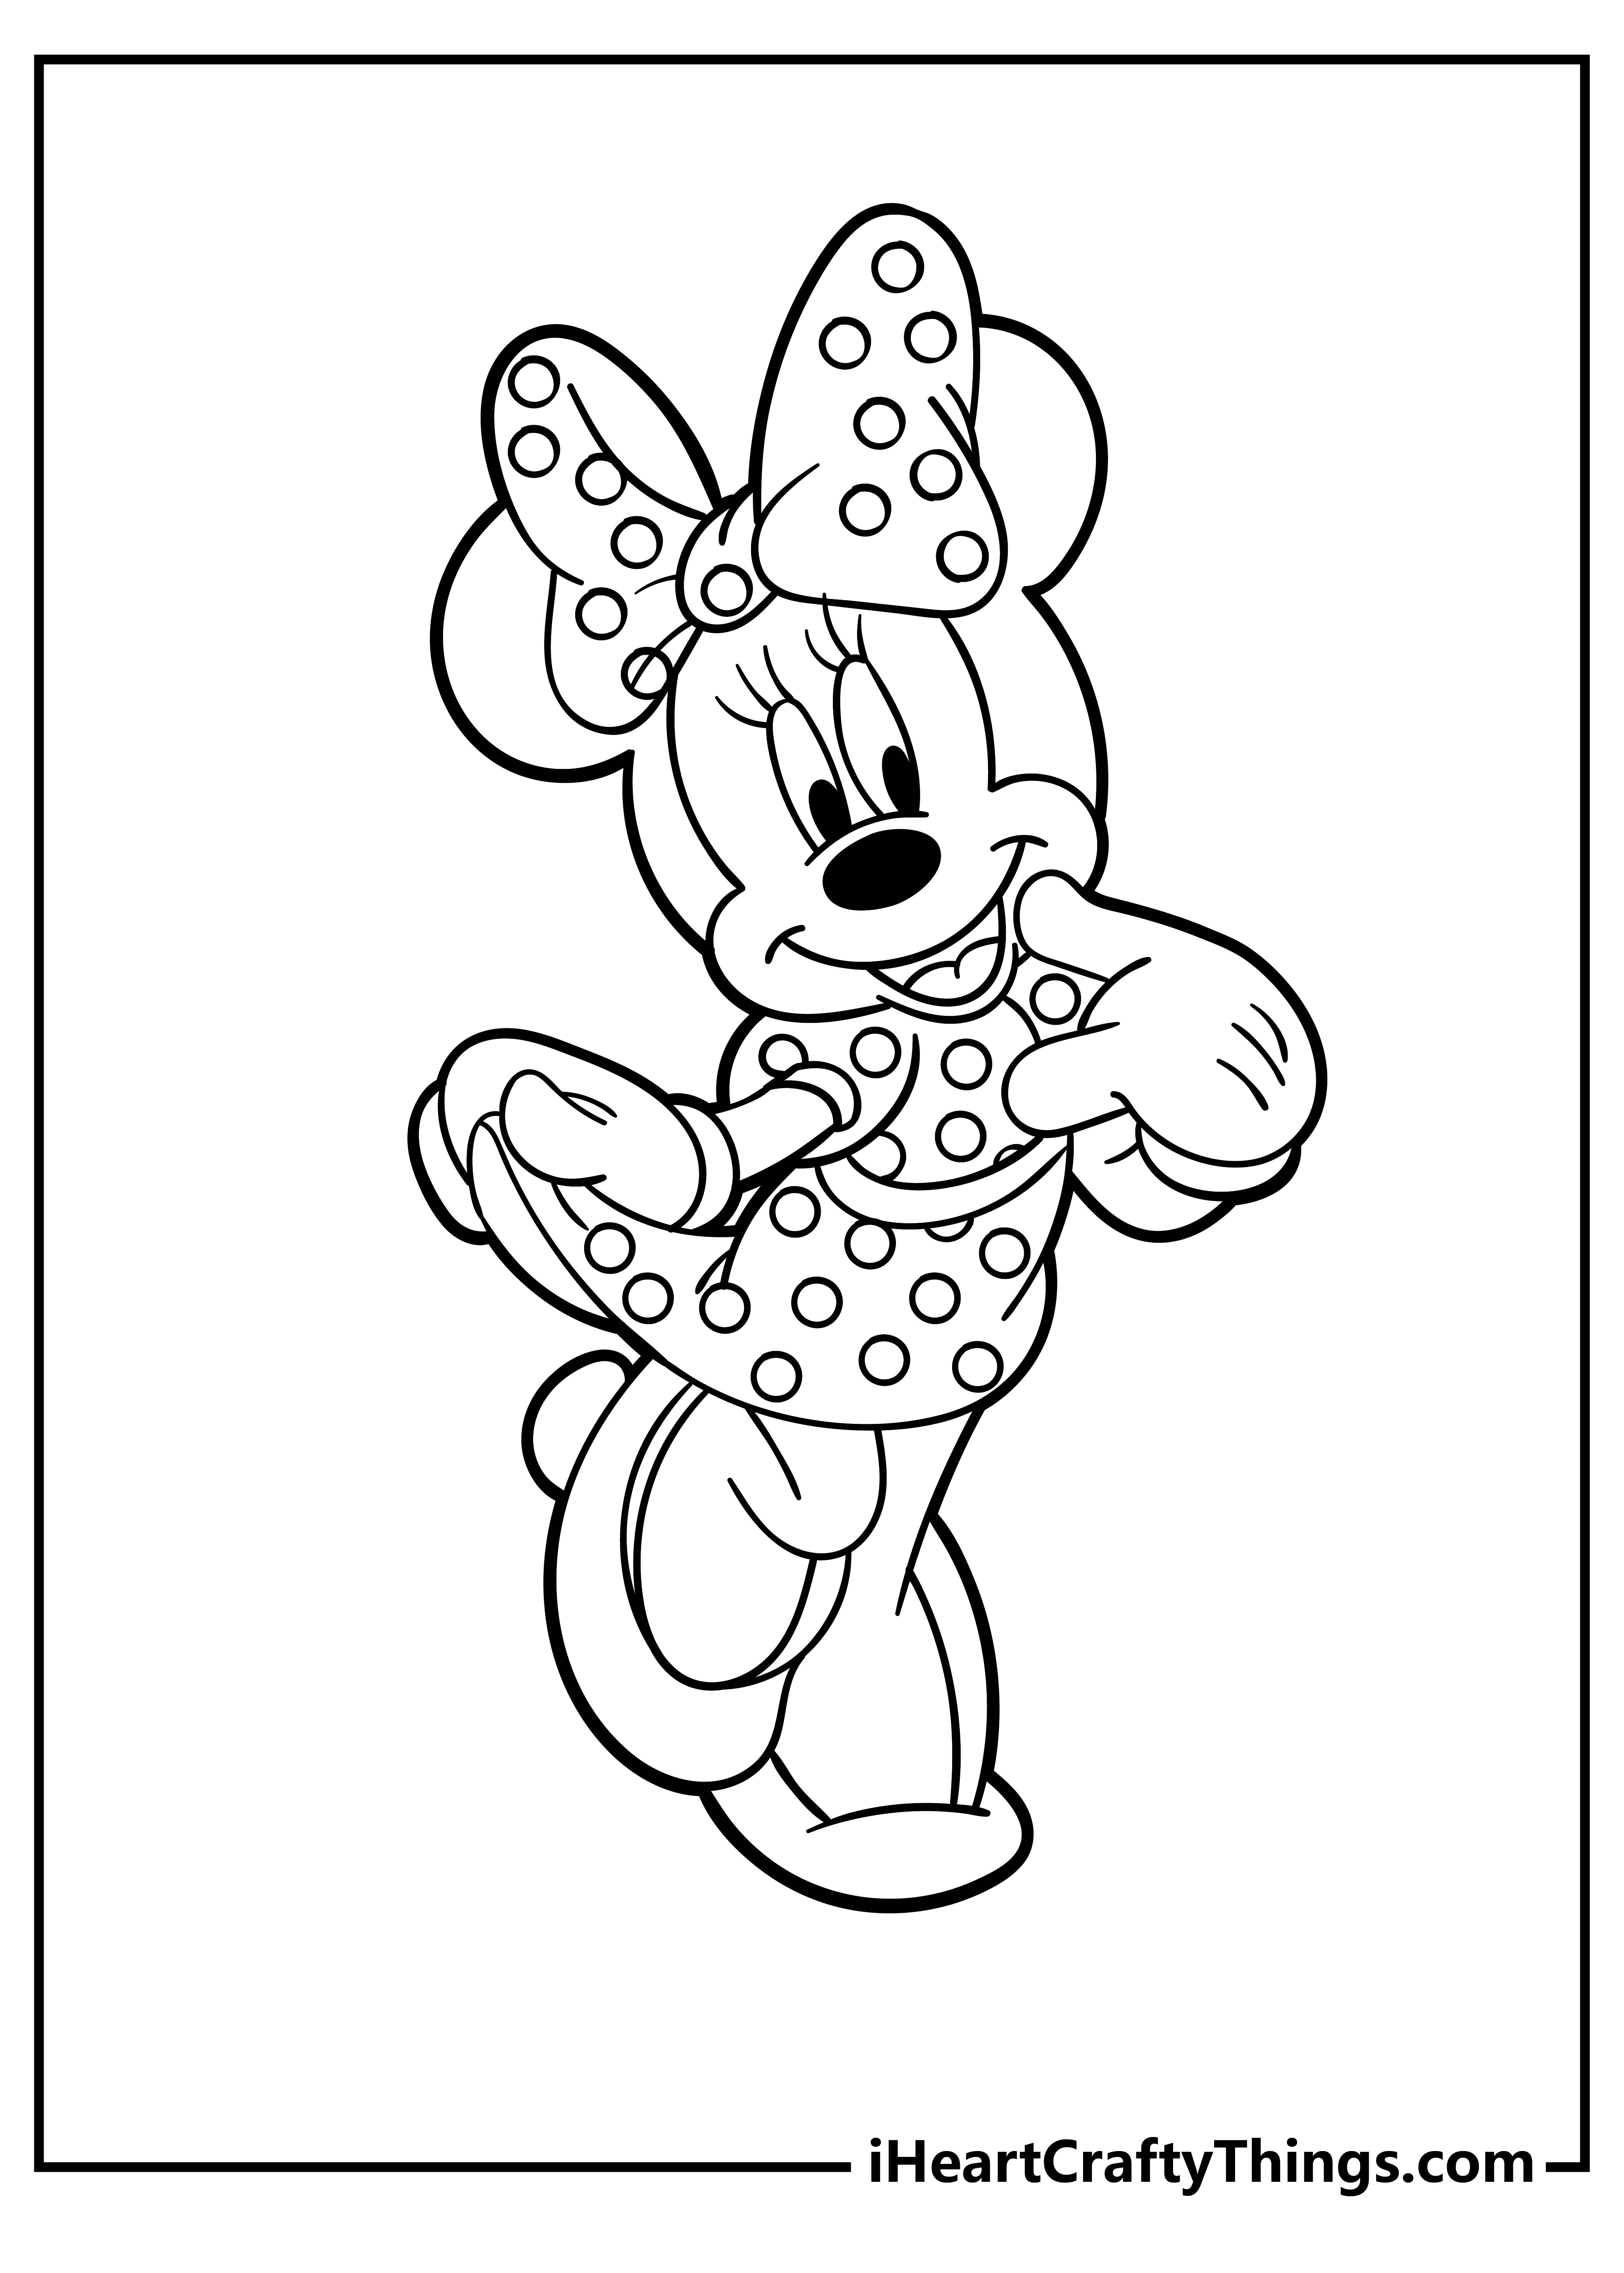 Minnie Mouse Coloring Pages free pdf download